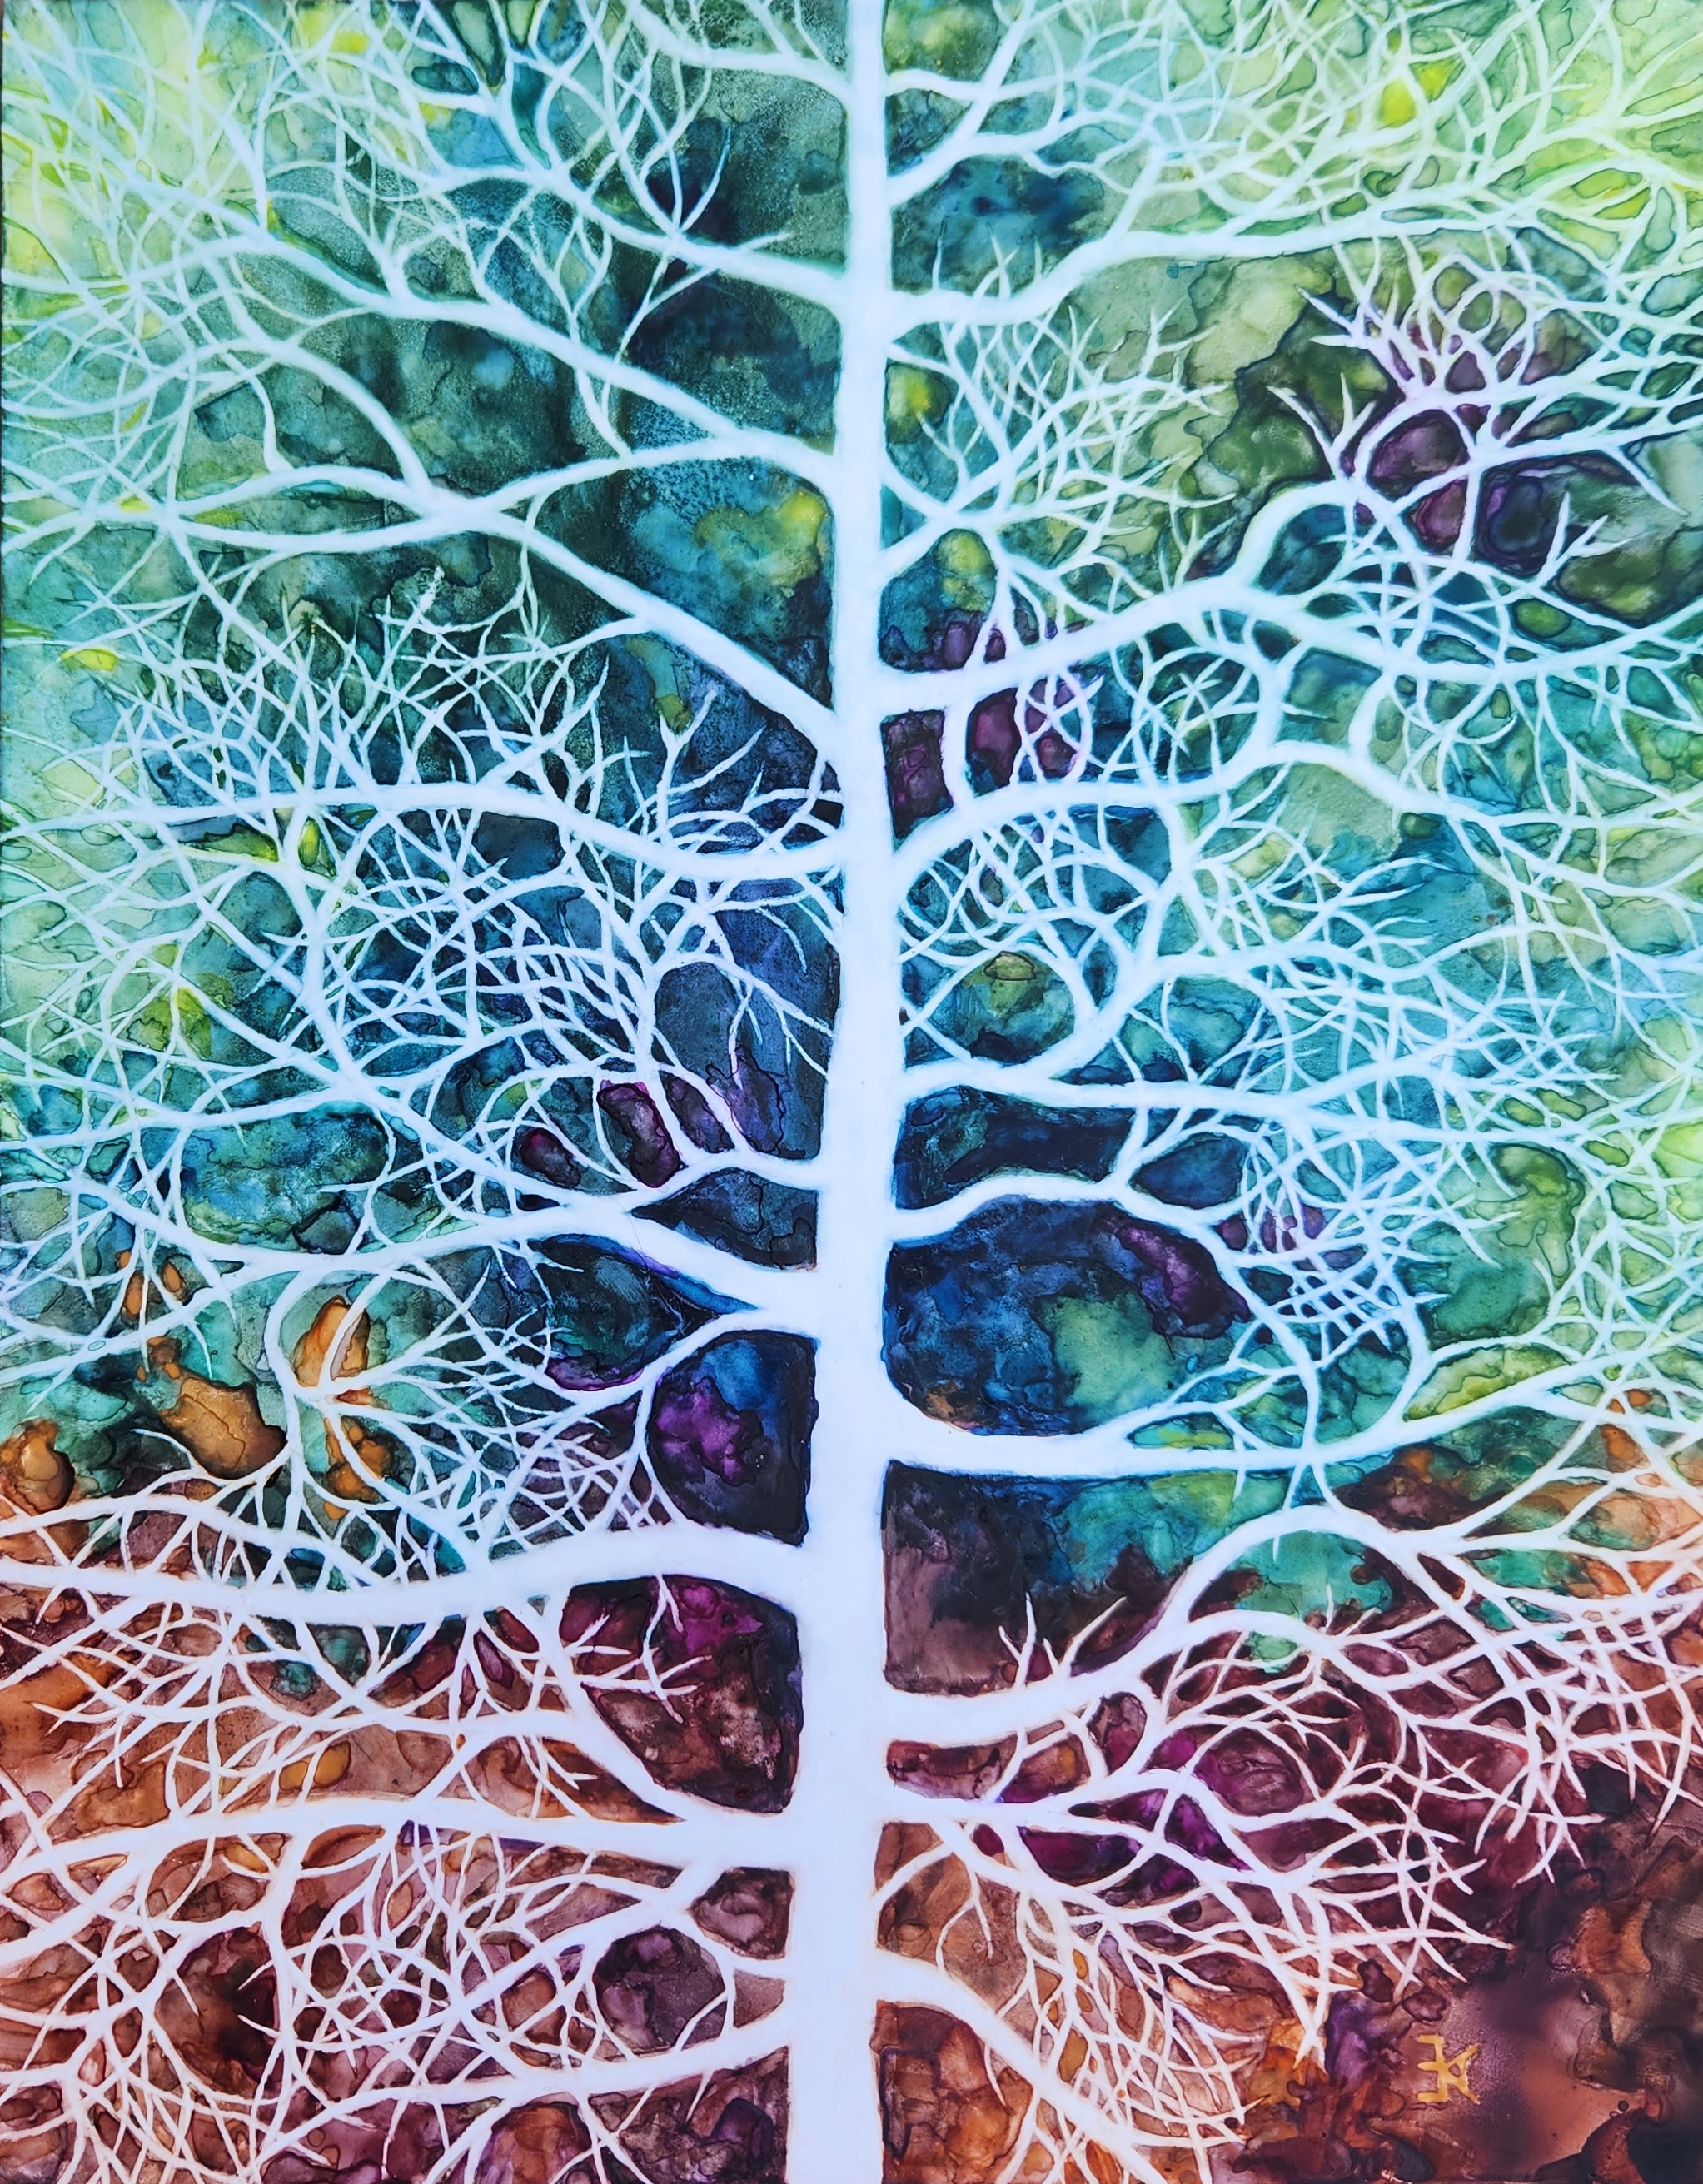 White tree branches, 11x14", $150, unframed